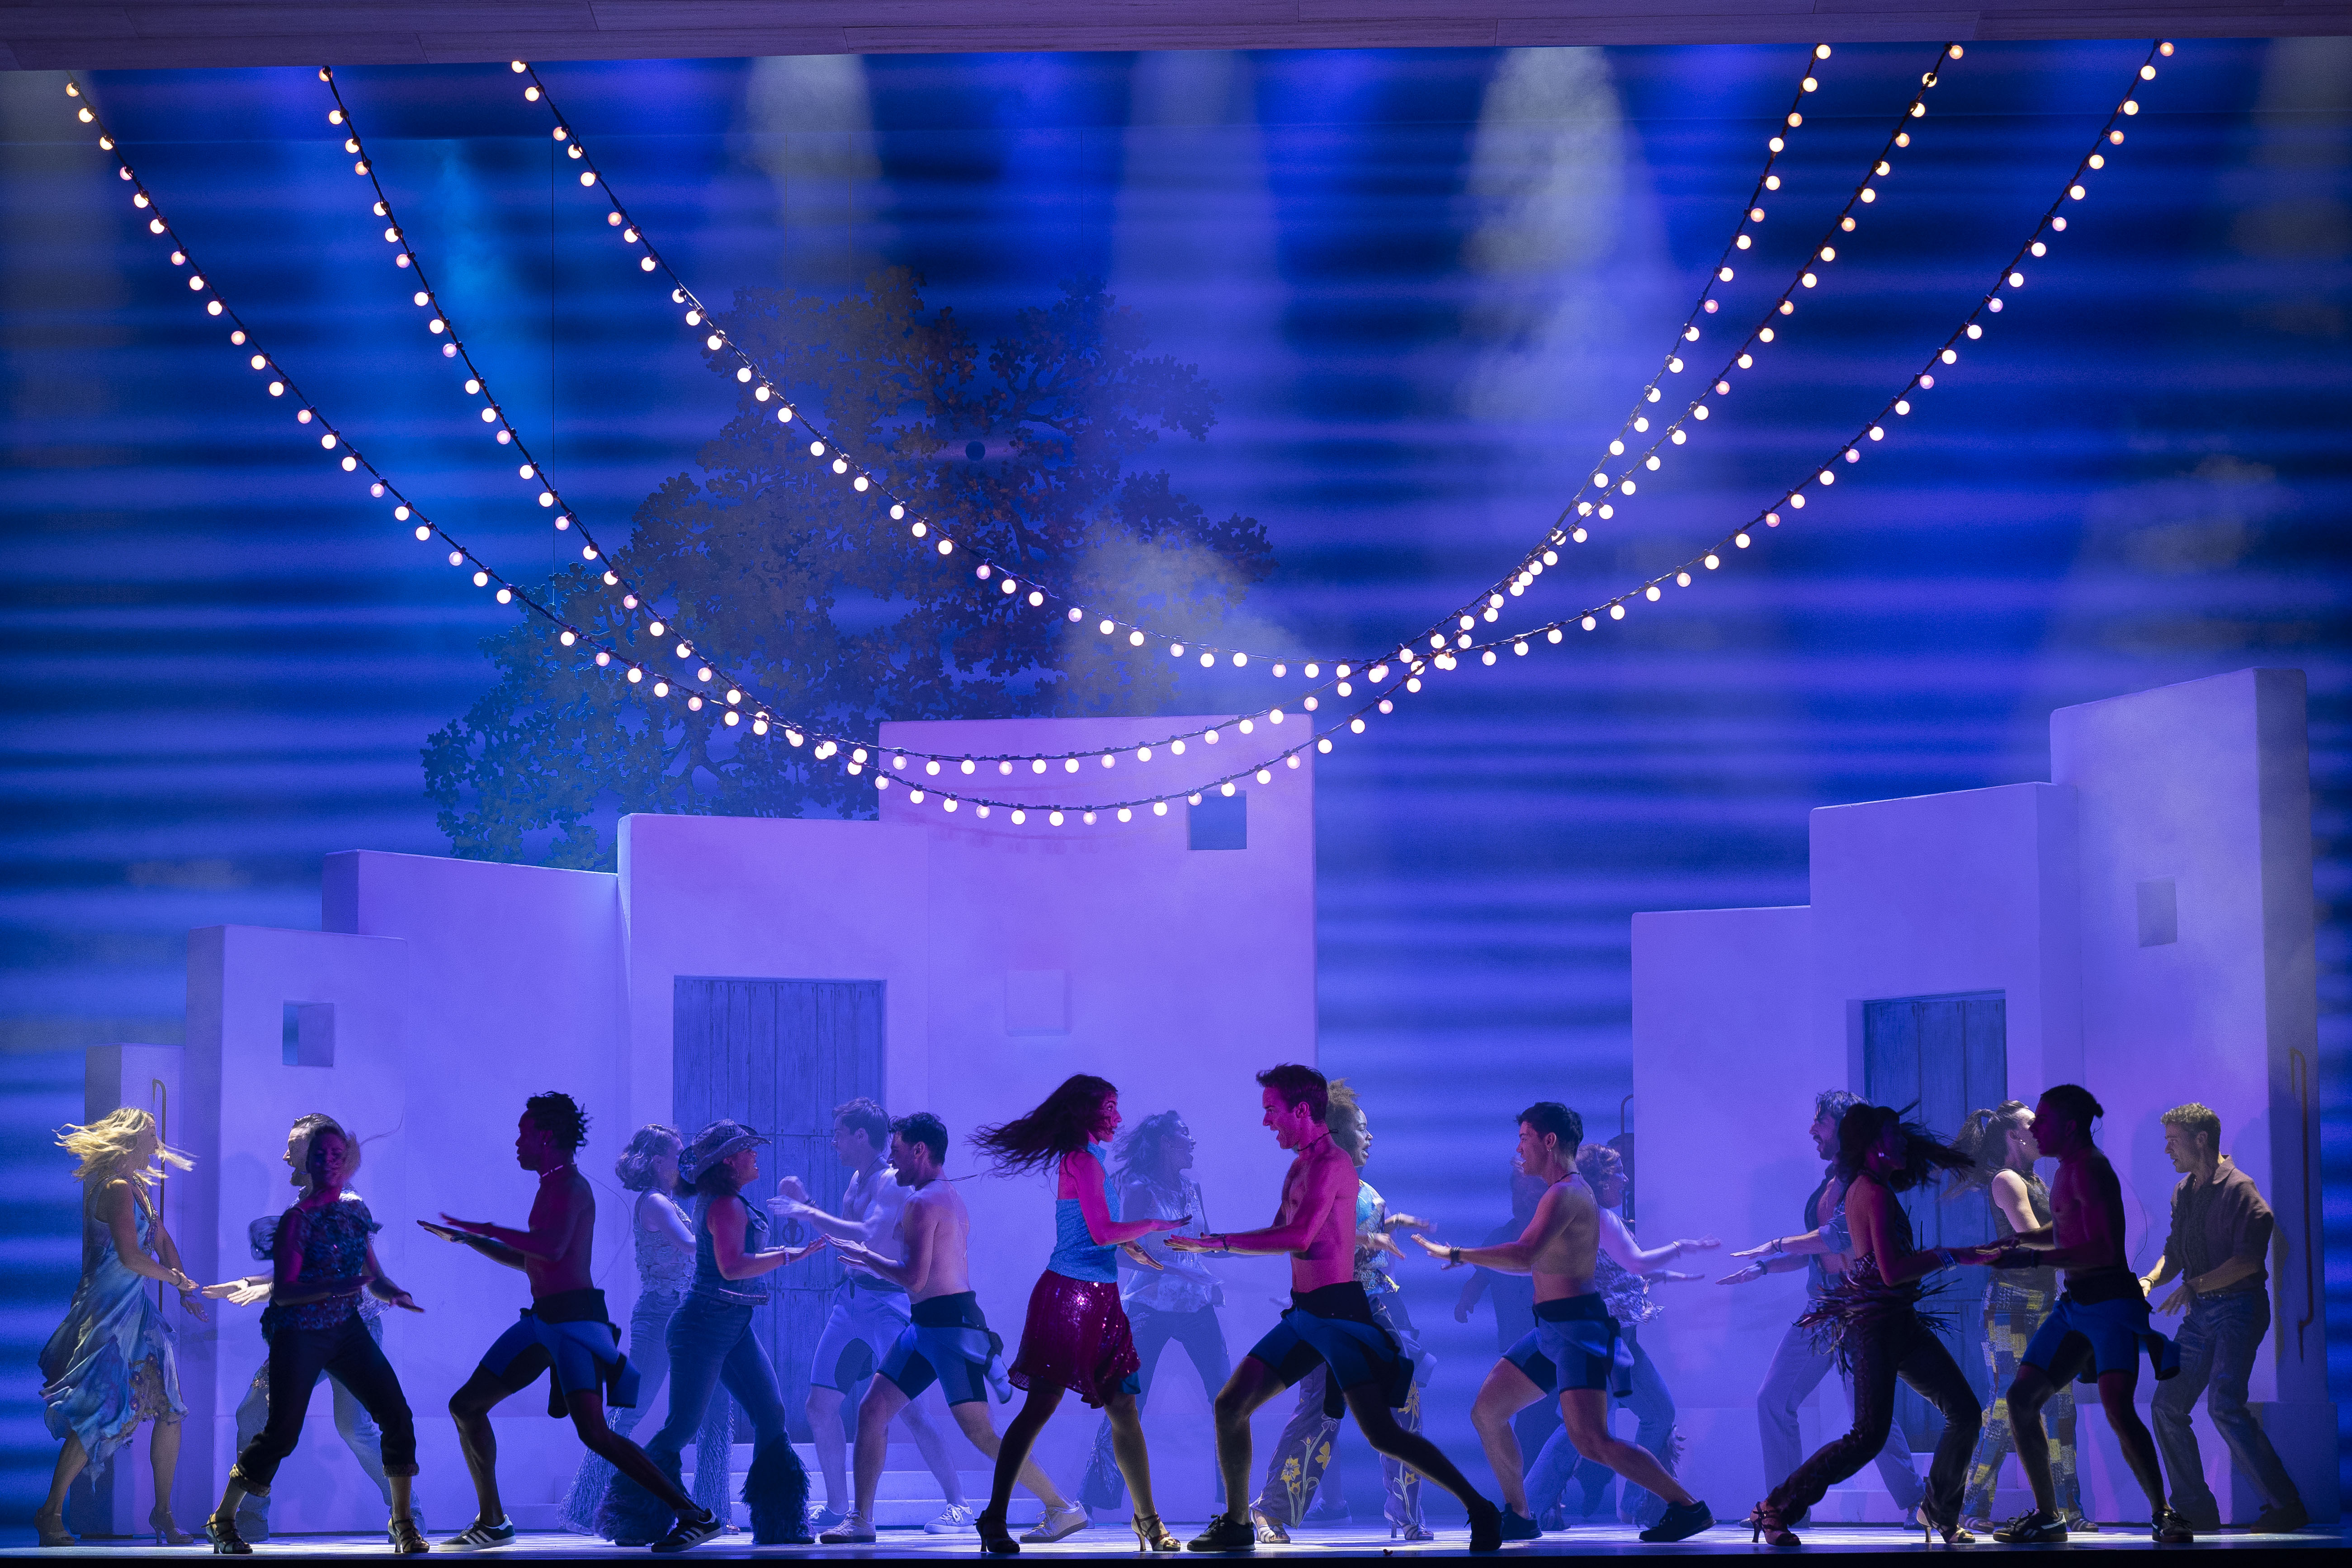 MAMMA MIA: THE FAMOUS MUSICAL IS BACK IN PARIS